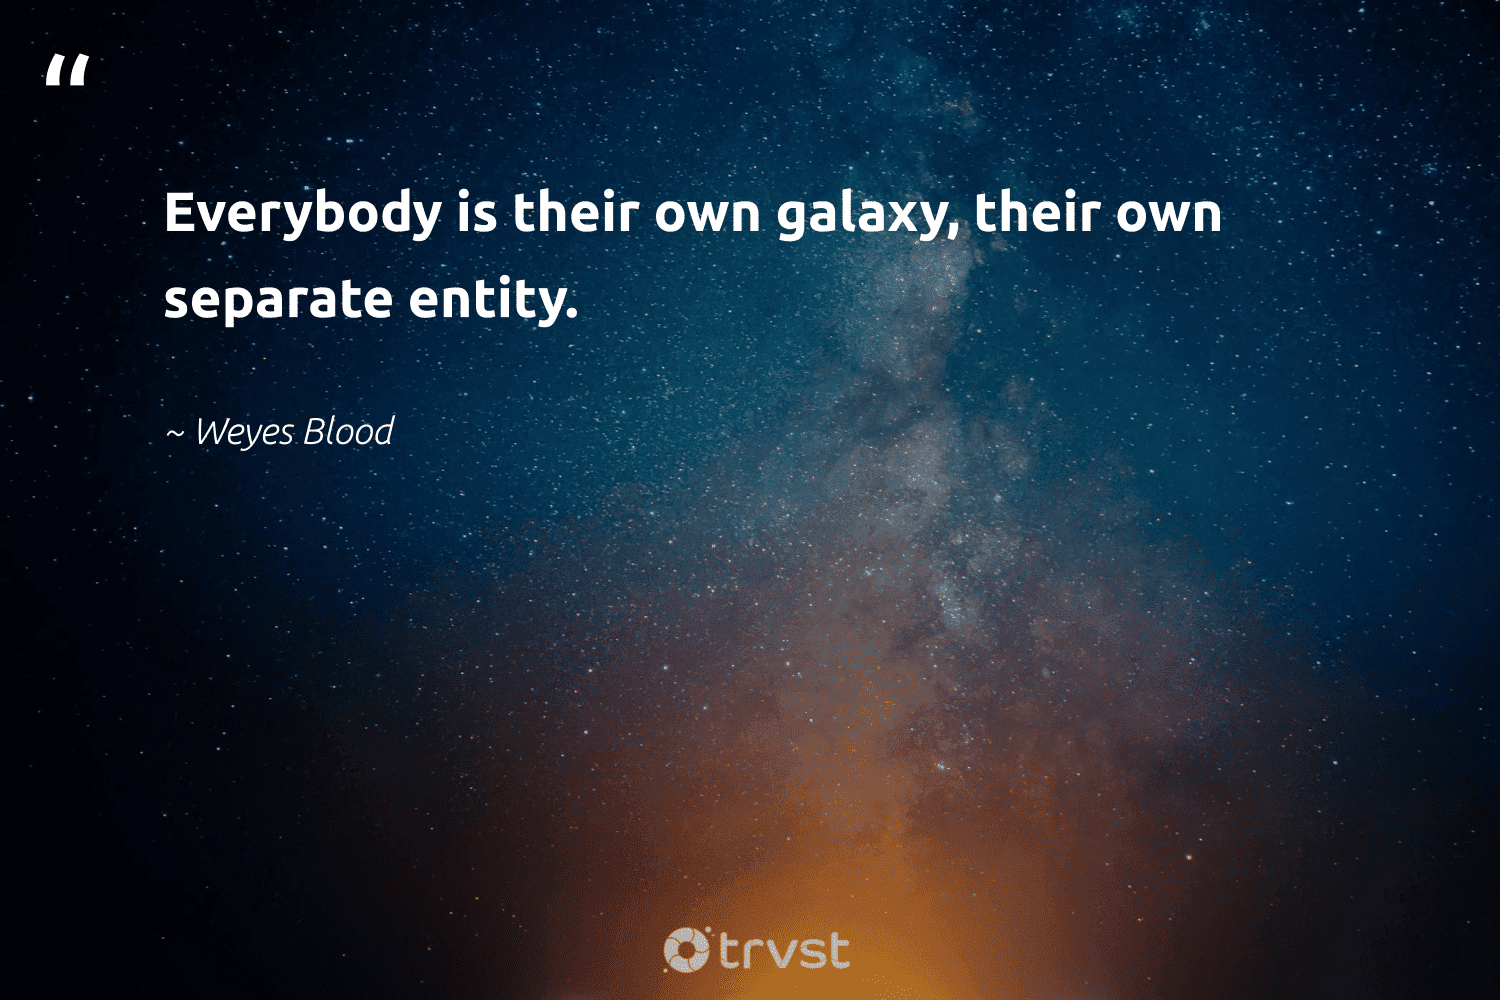 41 Galaxy Quotes To Help Understand Our Place Beyond the Sky